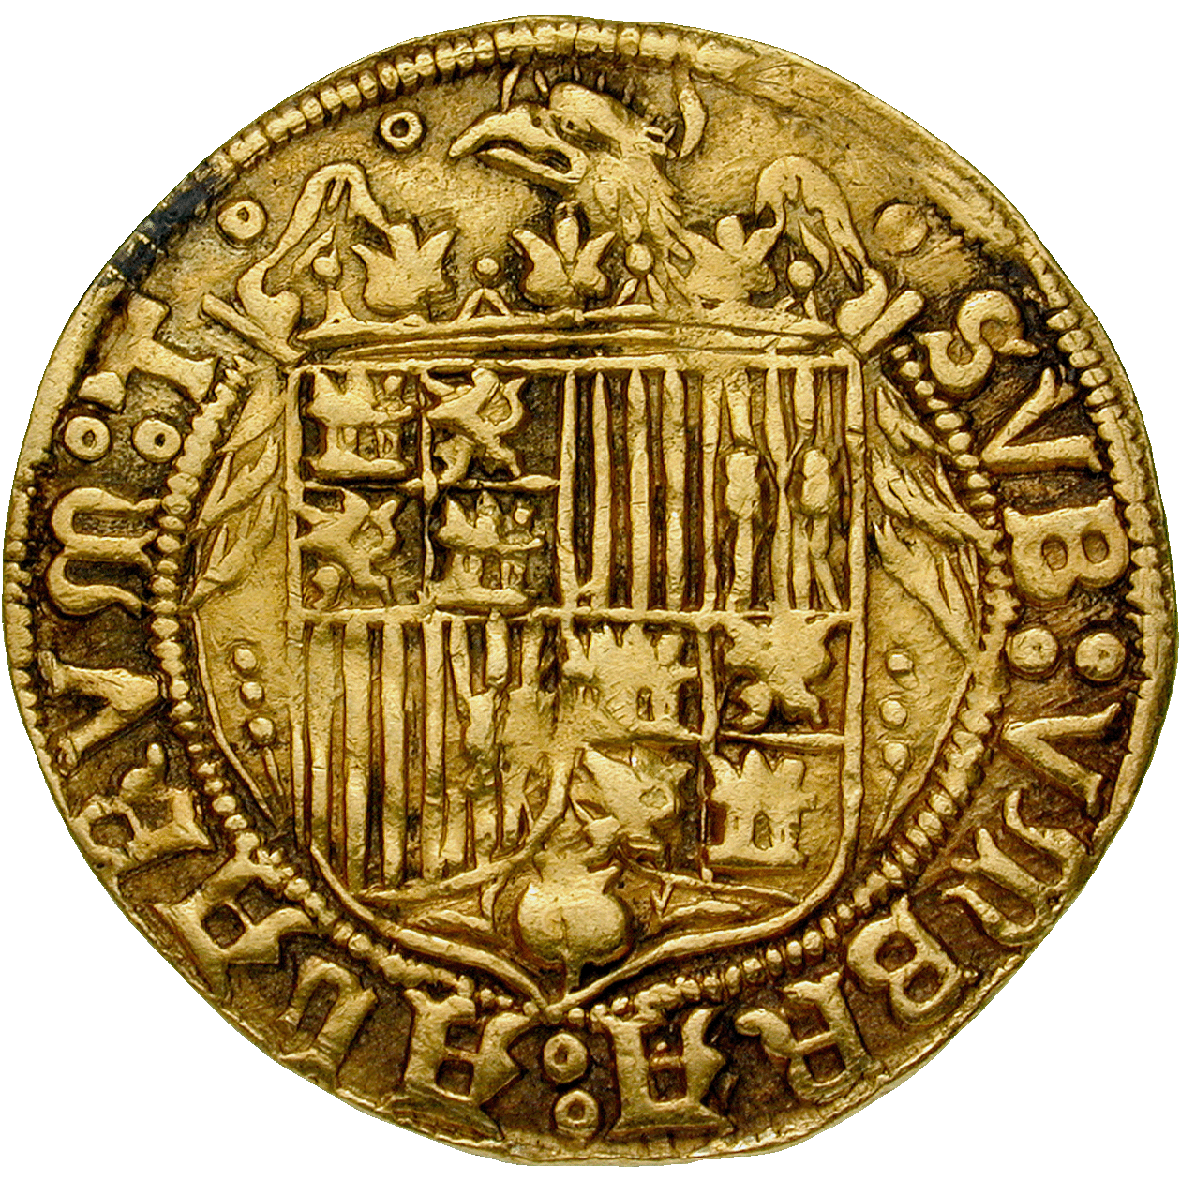 Kingdom of Spain, Isabella I and Ferdinand II, Double Excelente (reverse)